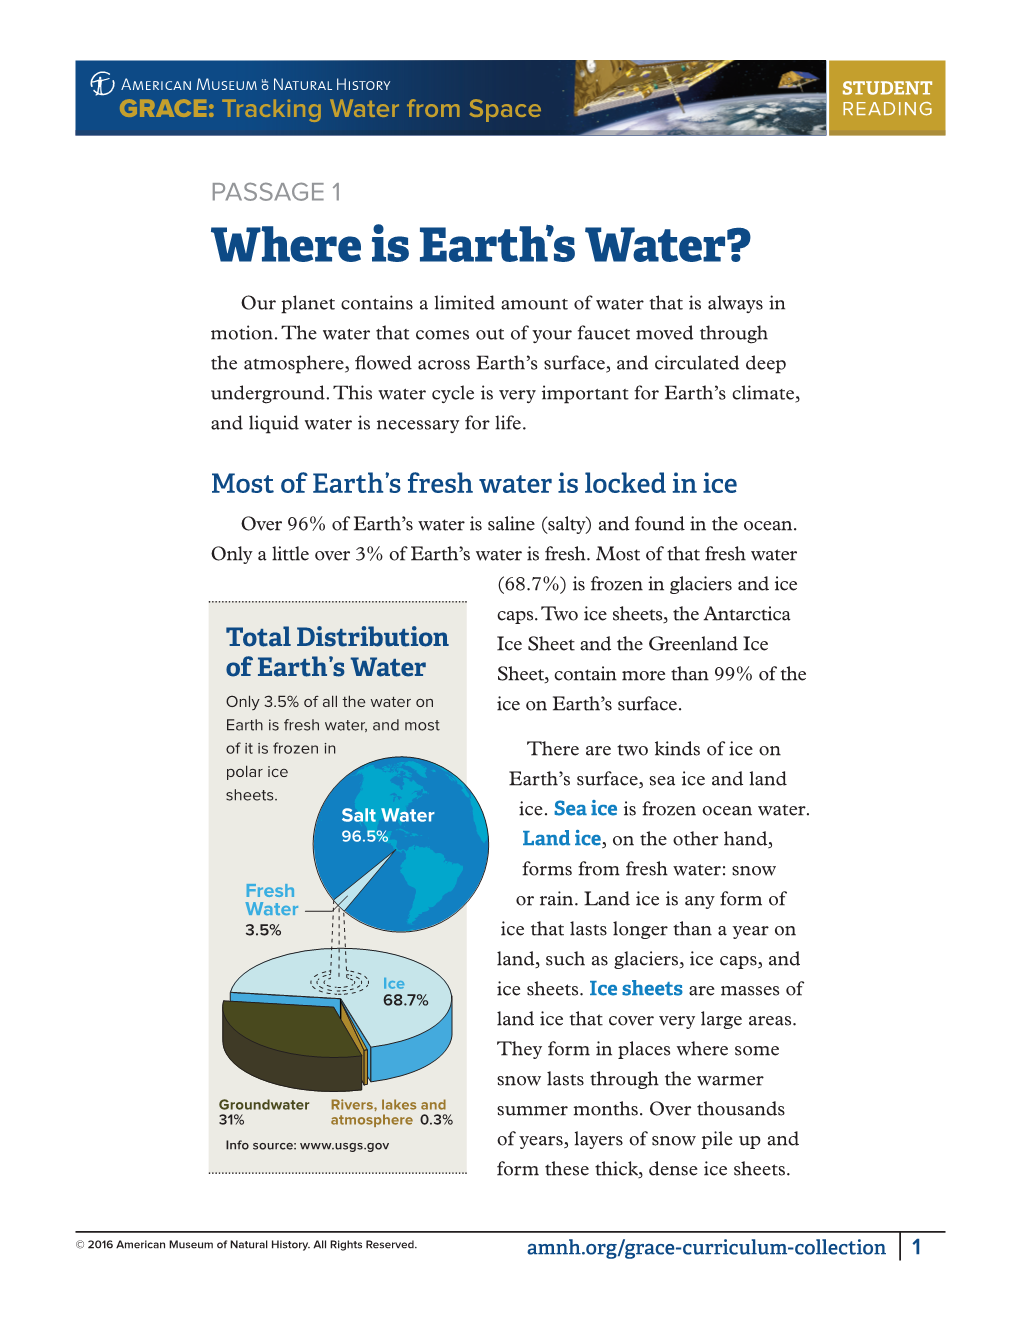 Where Is Earth's Water?